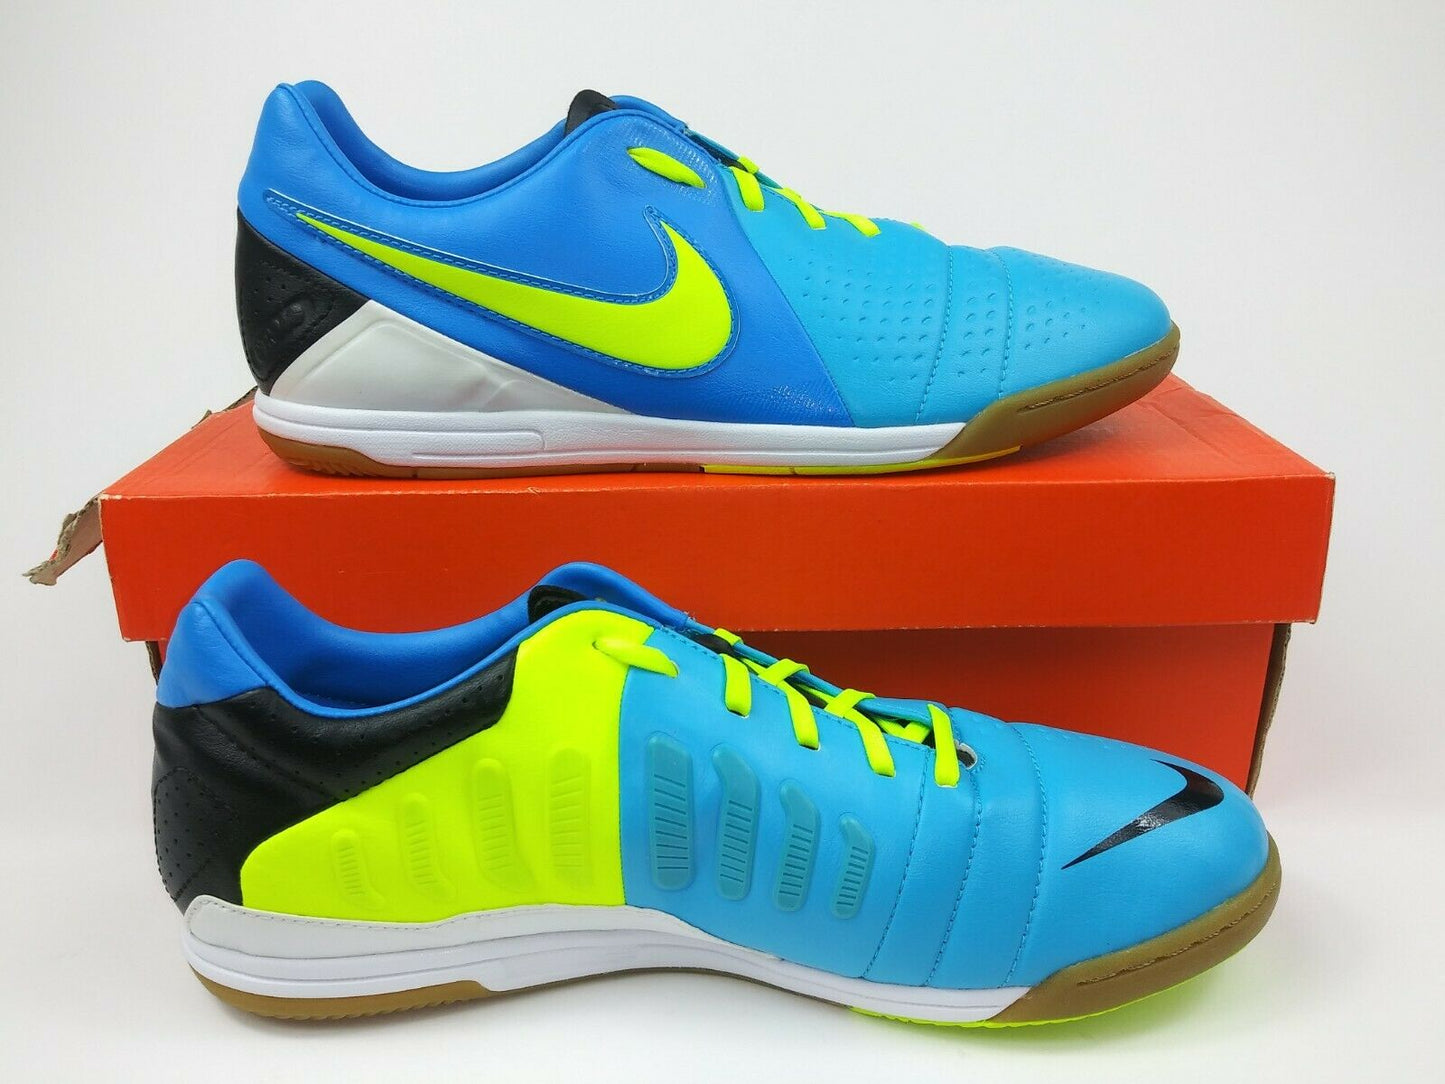 Nike CTR 360 Libretto lll IC Indoor Shoes Blue